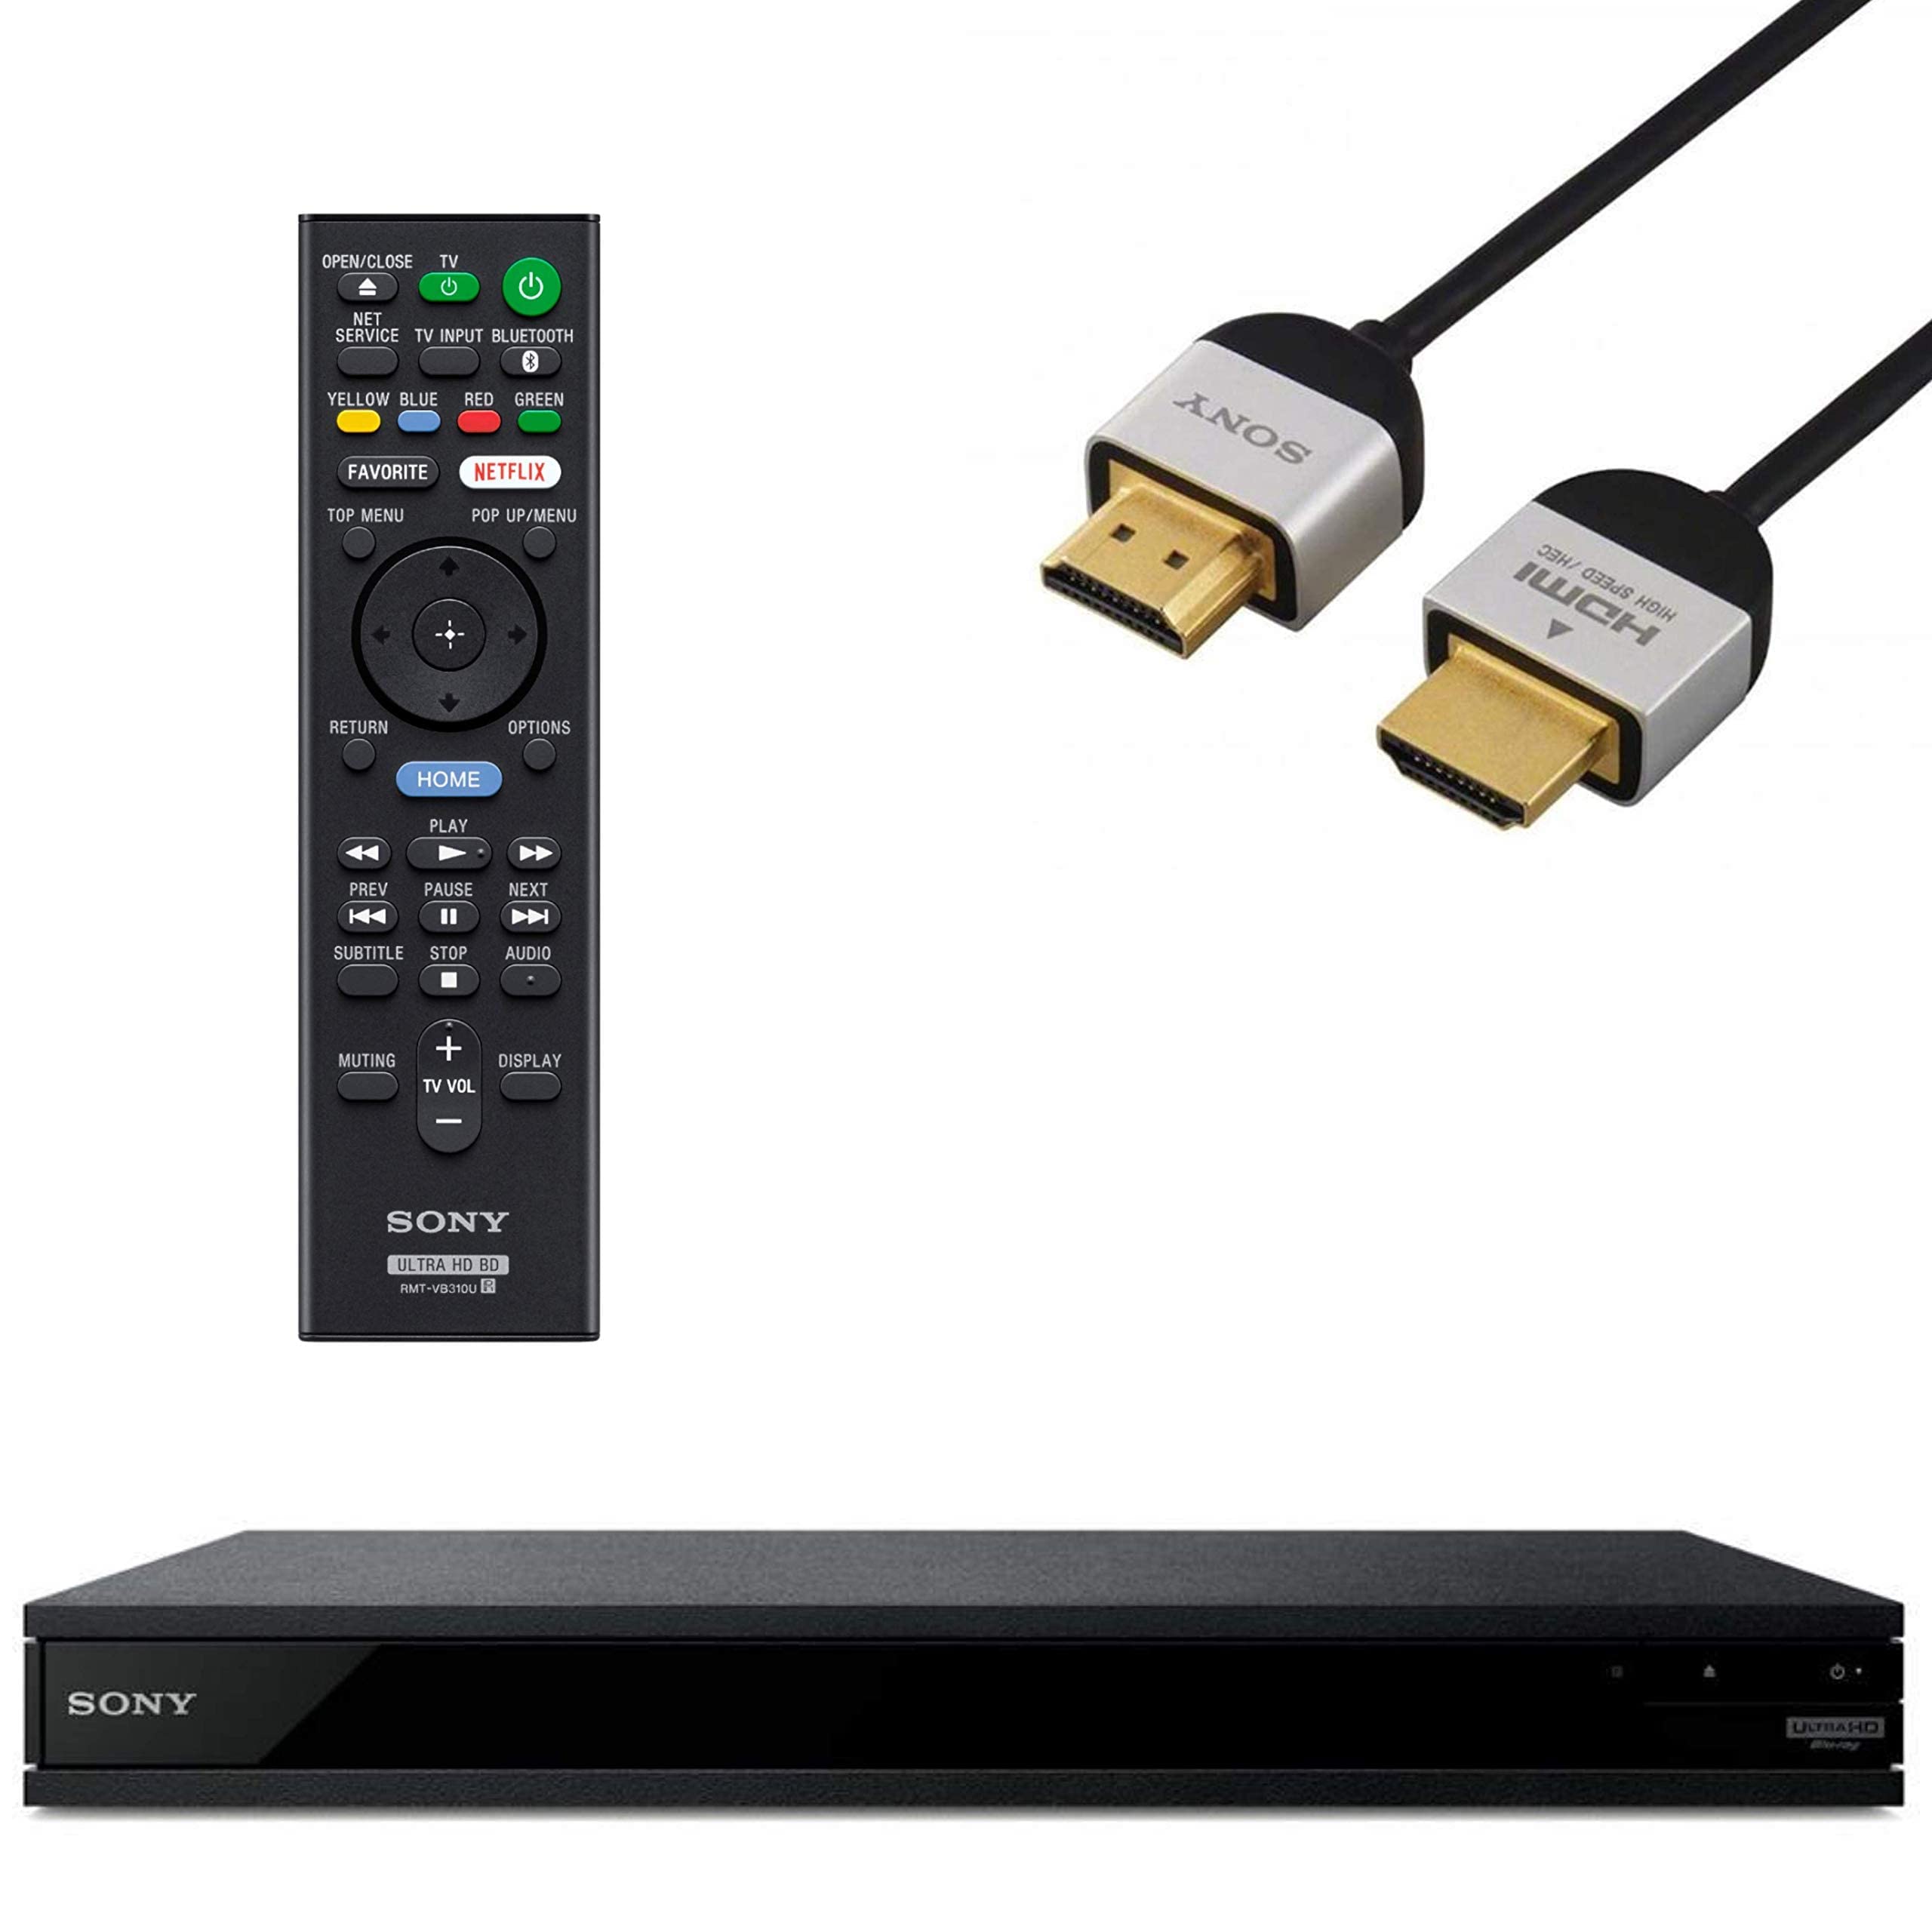 Sony UBPX800 Streaming 4K Ultra HD 3D Hi-Res Audio Wi-Fi and Bluetooth Built-in Blu-ray Player with A 4K HDMI Cable and Remote Control- Black